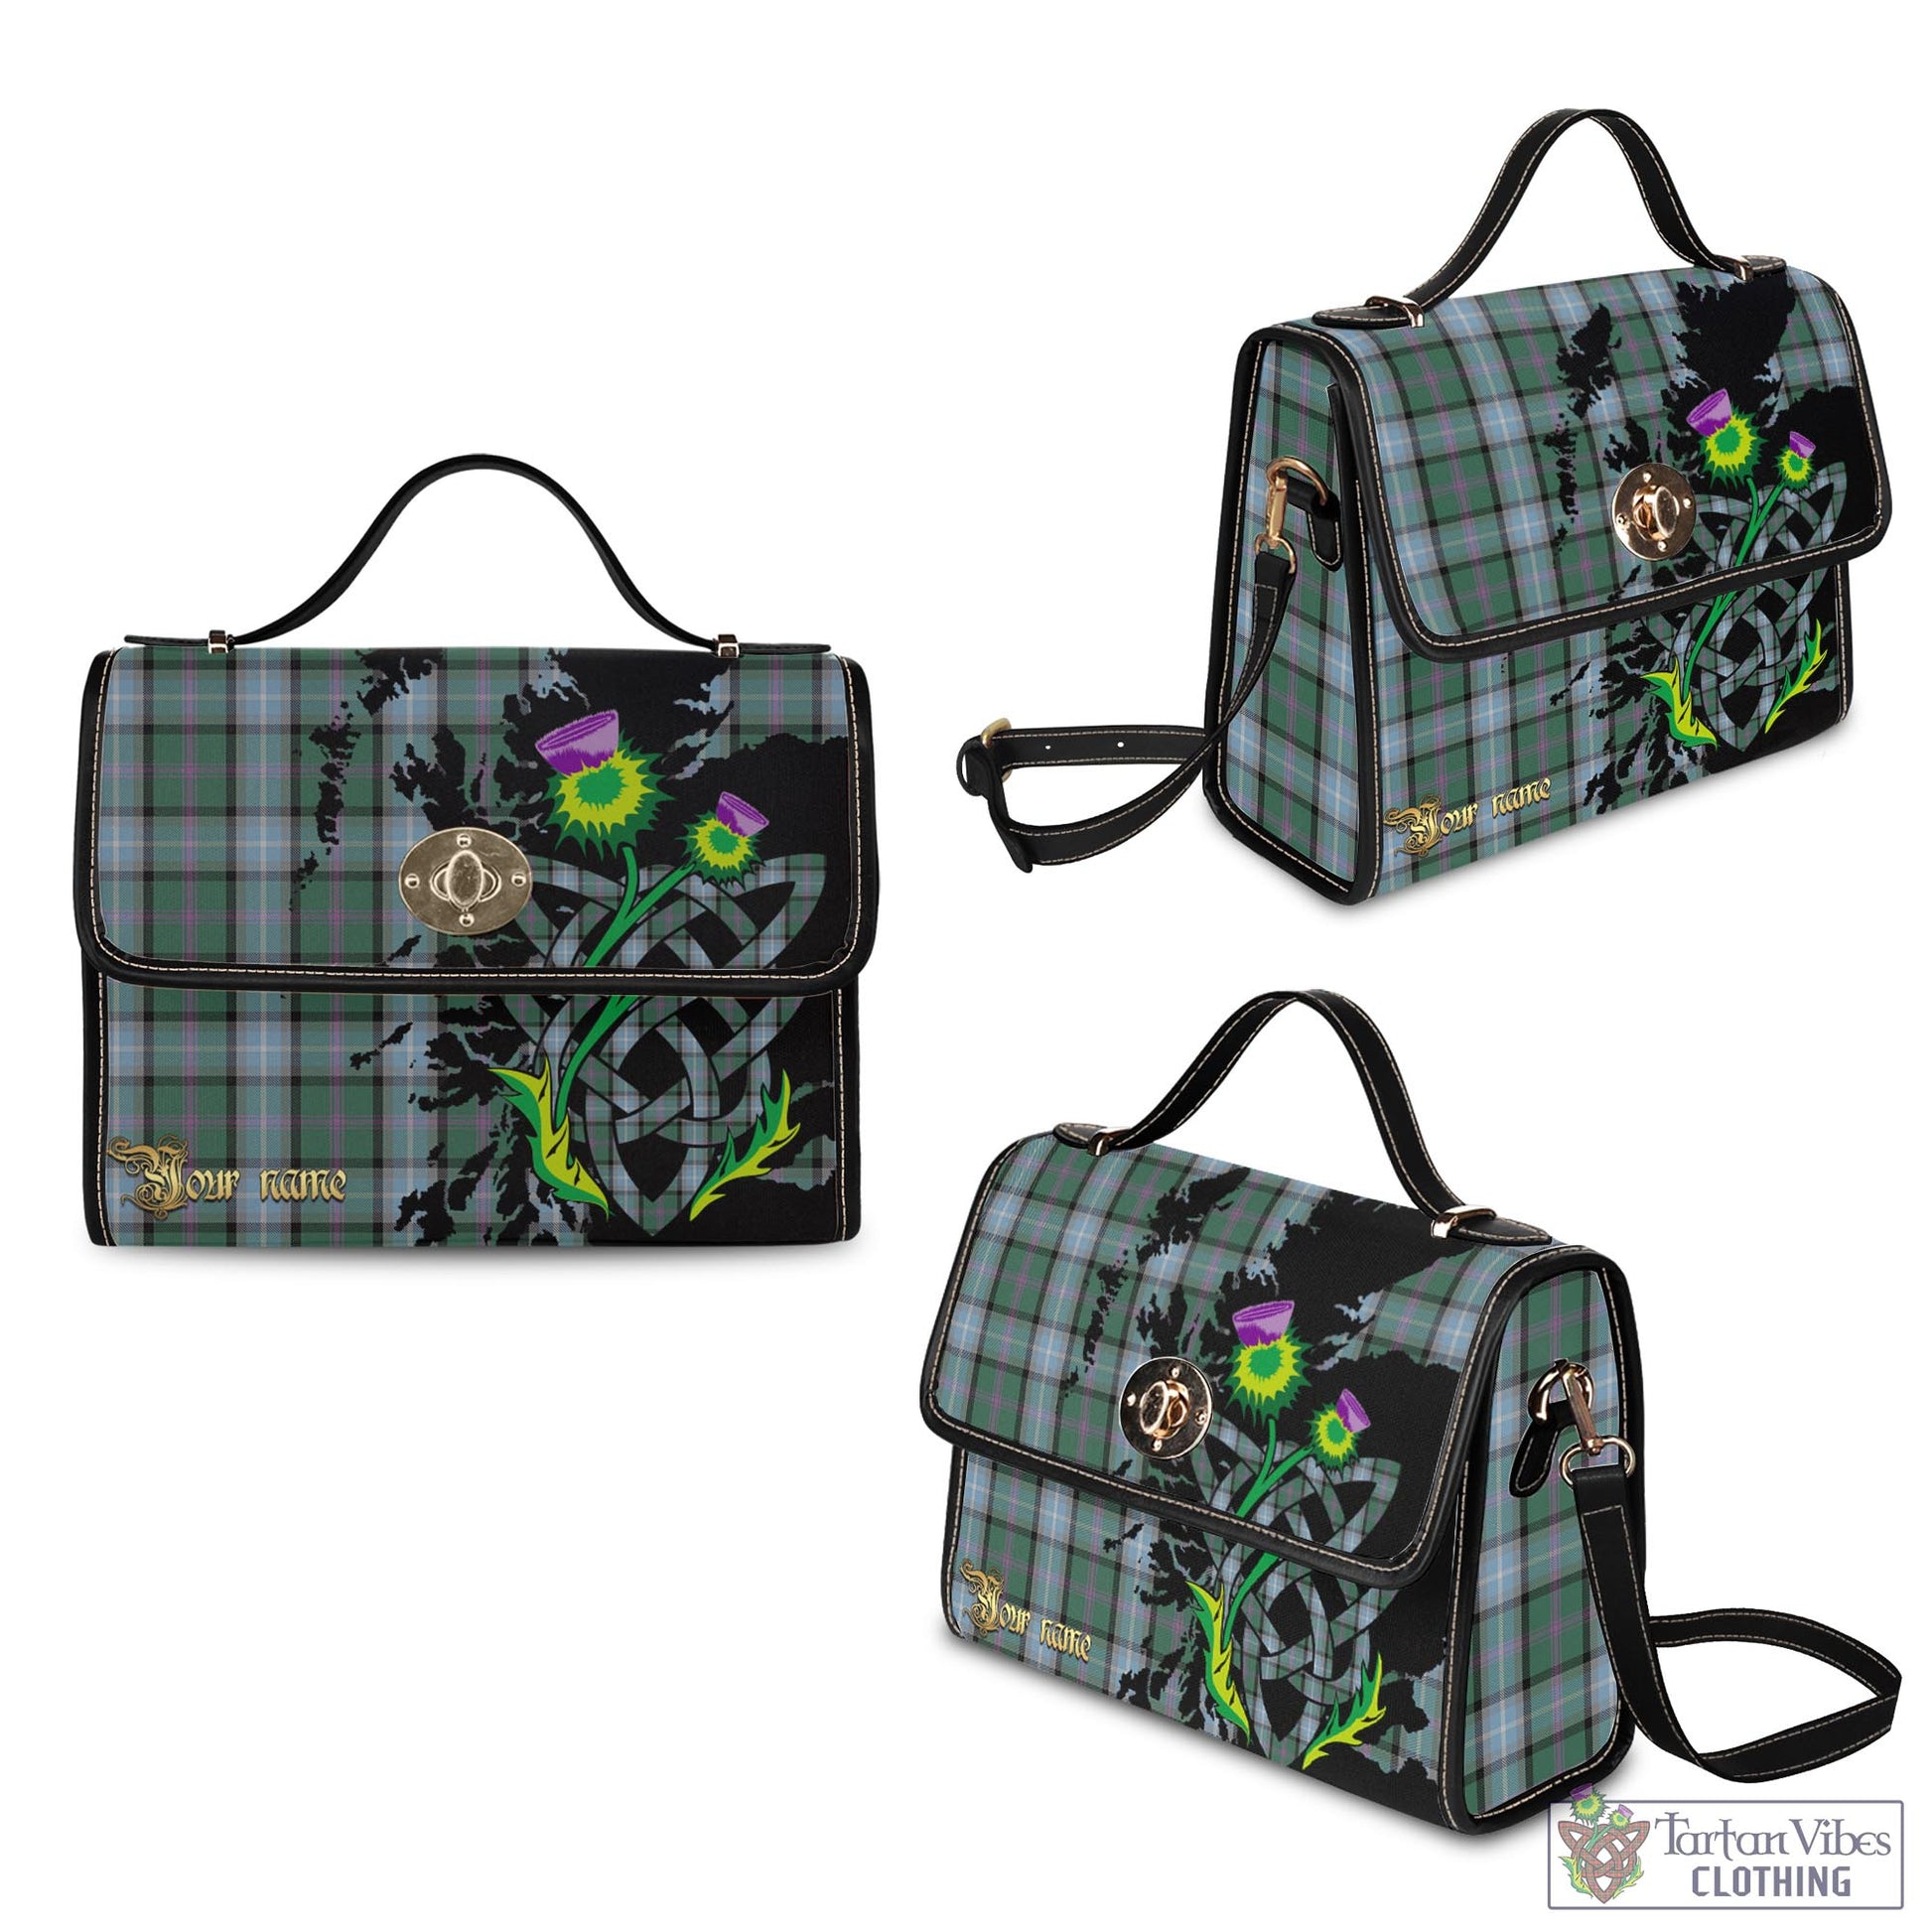 Tartan Vibes Clothing Alexander of Menstry Hunting Tartan Waterproof Canvas Bag with Scotland Map and Thistle Celtic Accents